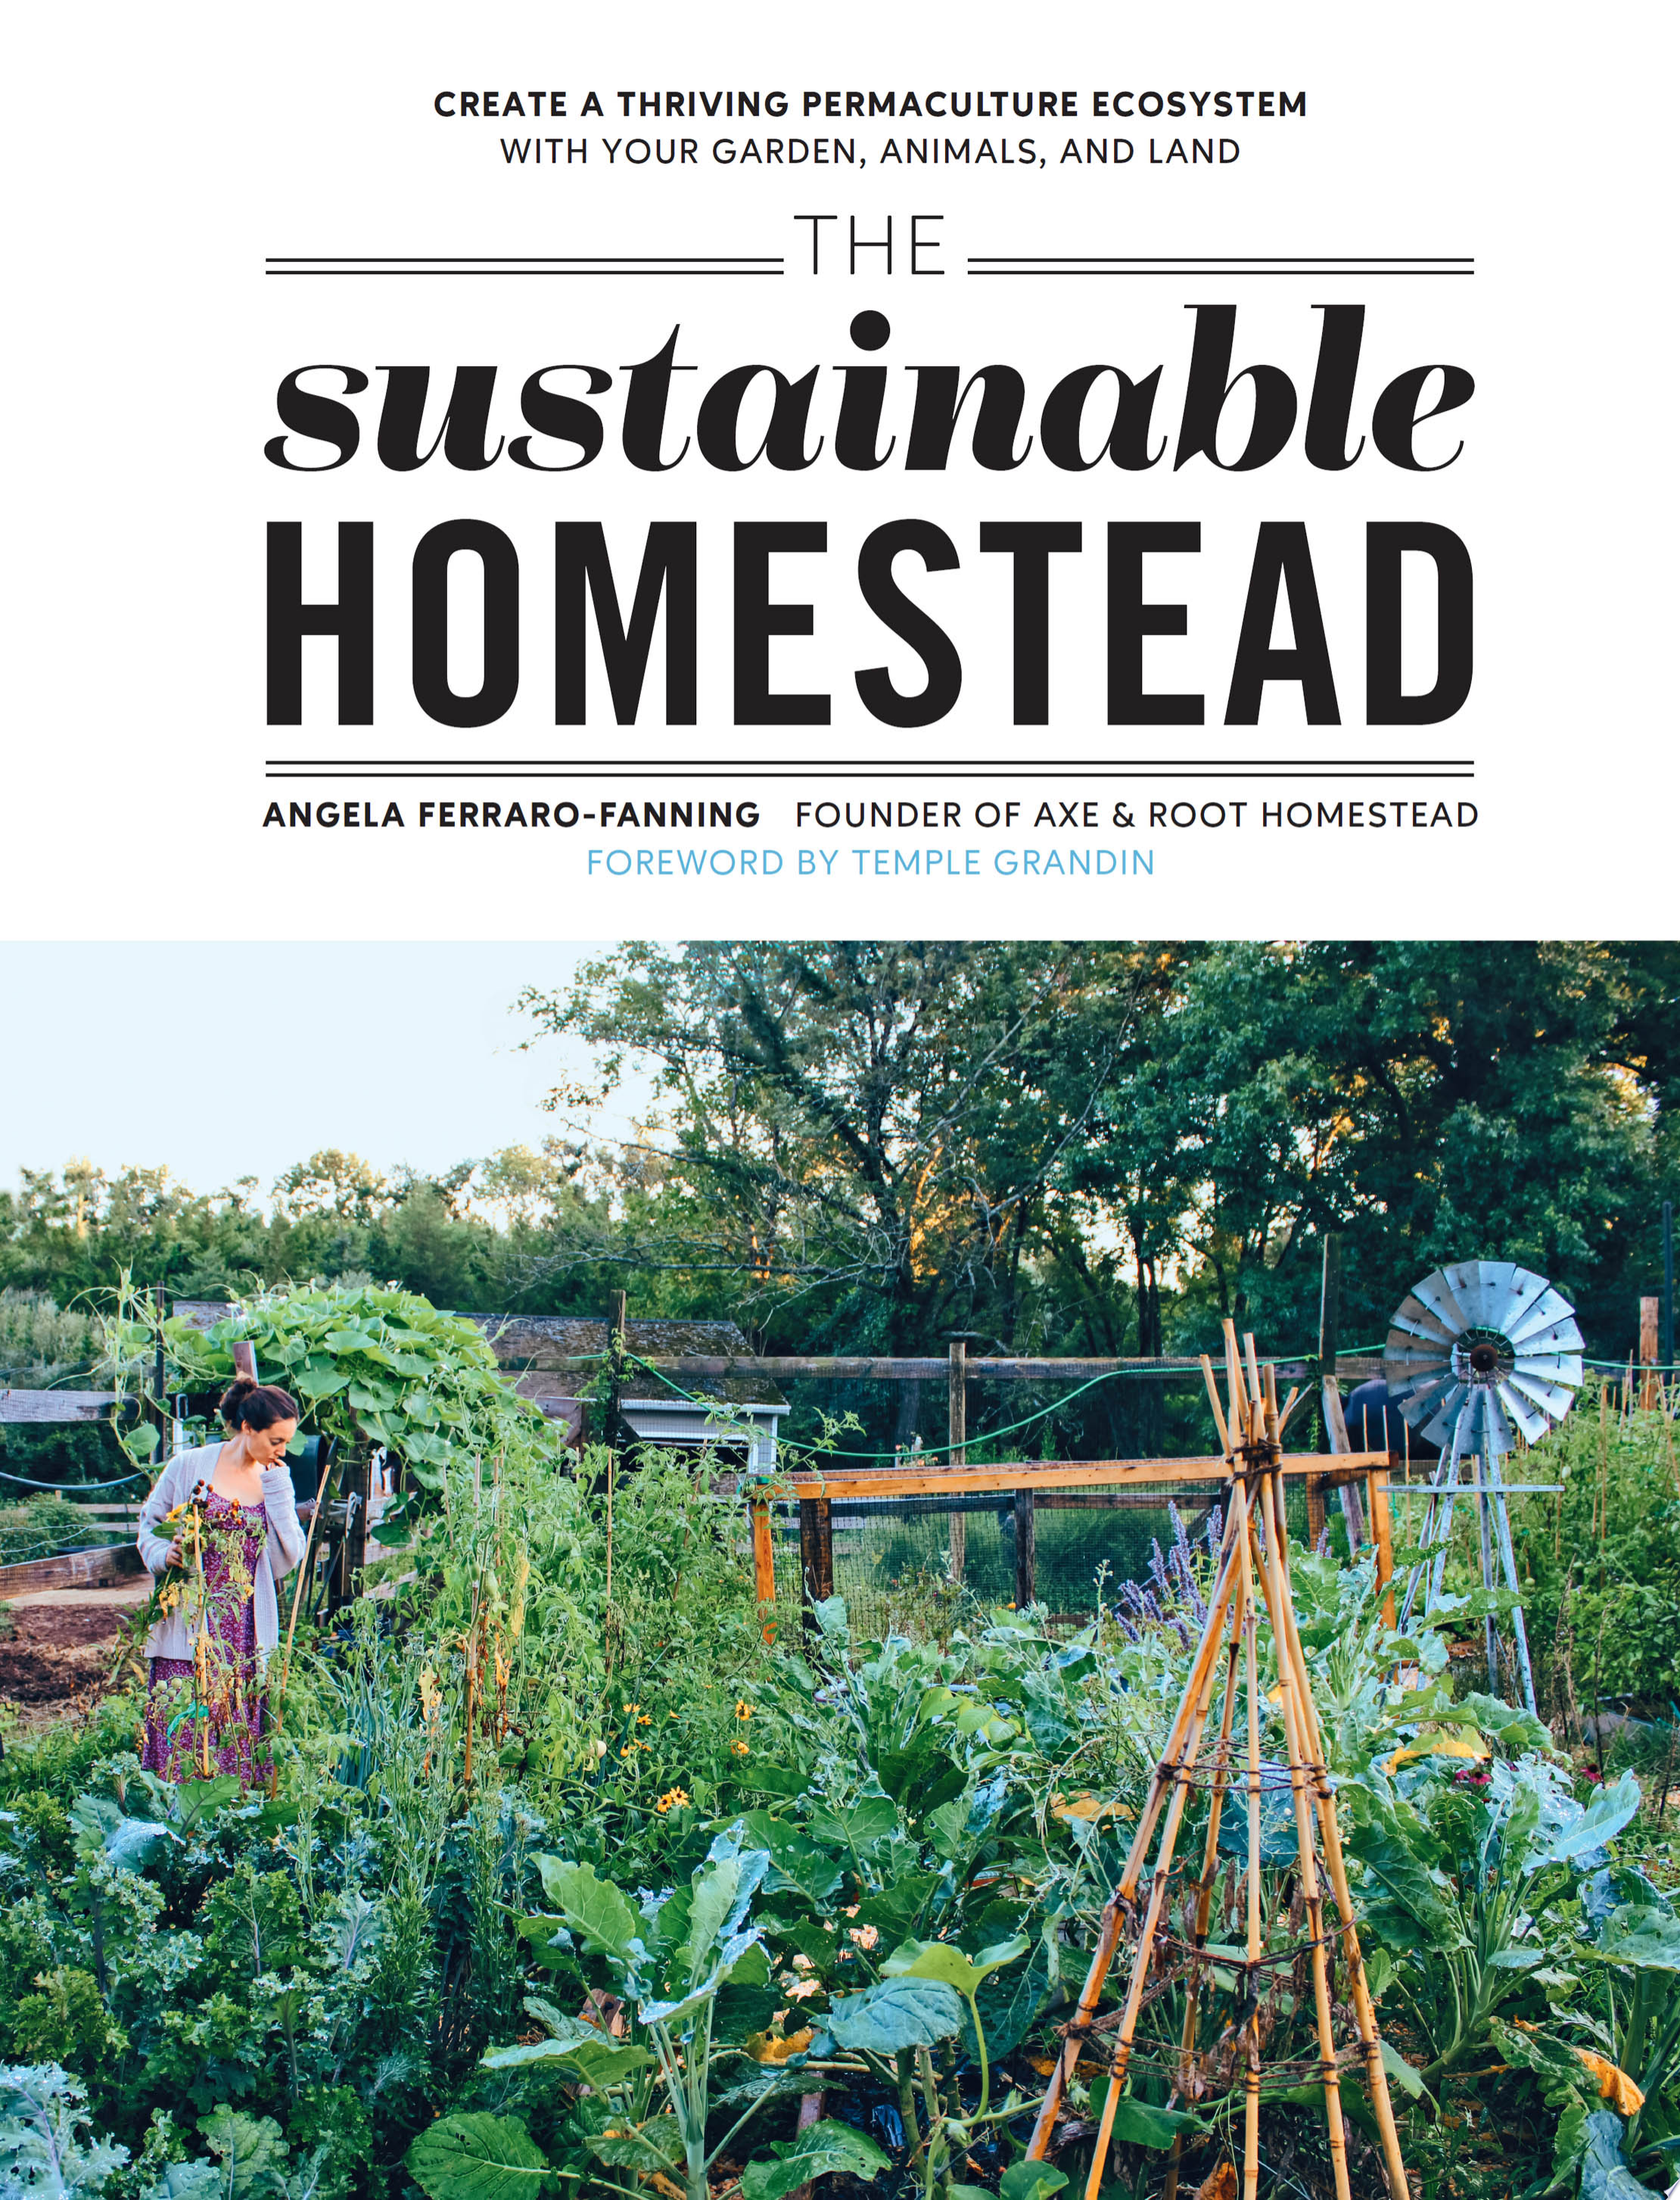 Image for "The Sustainable Homestead"